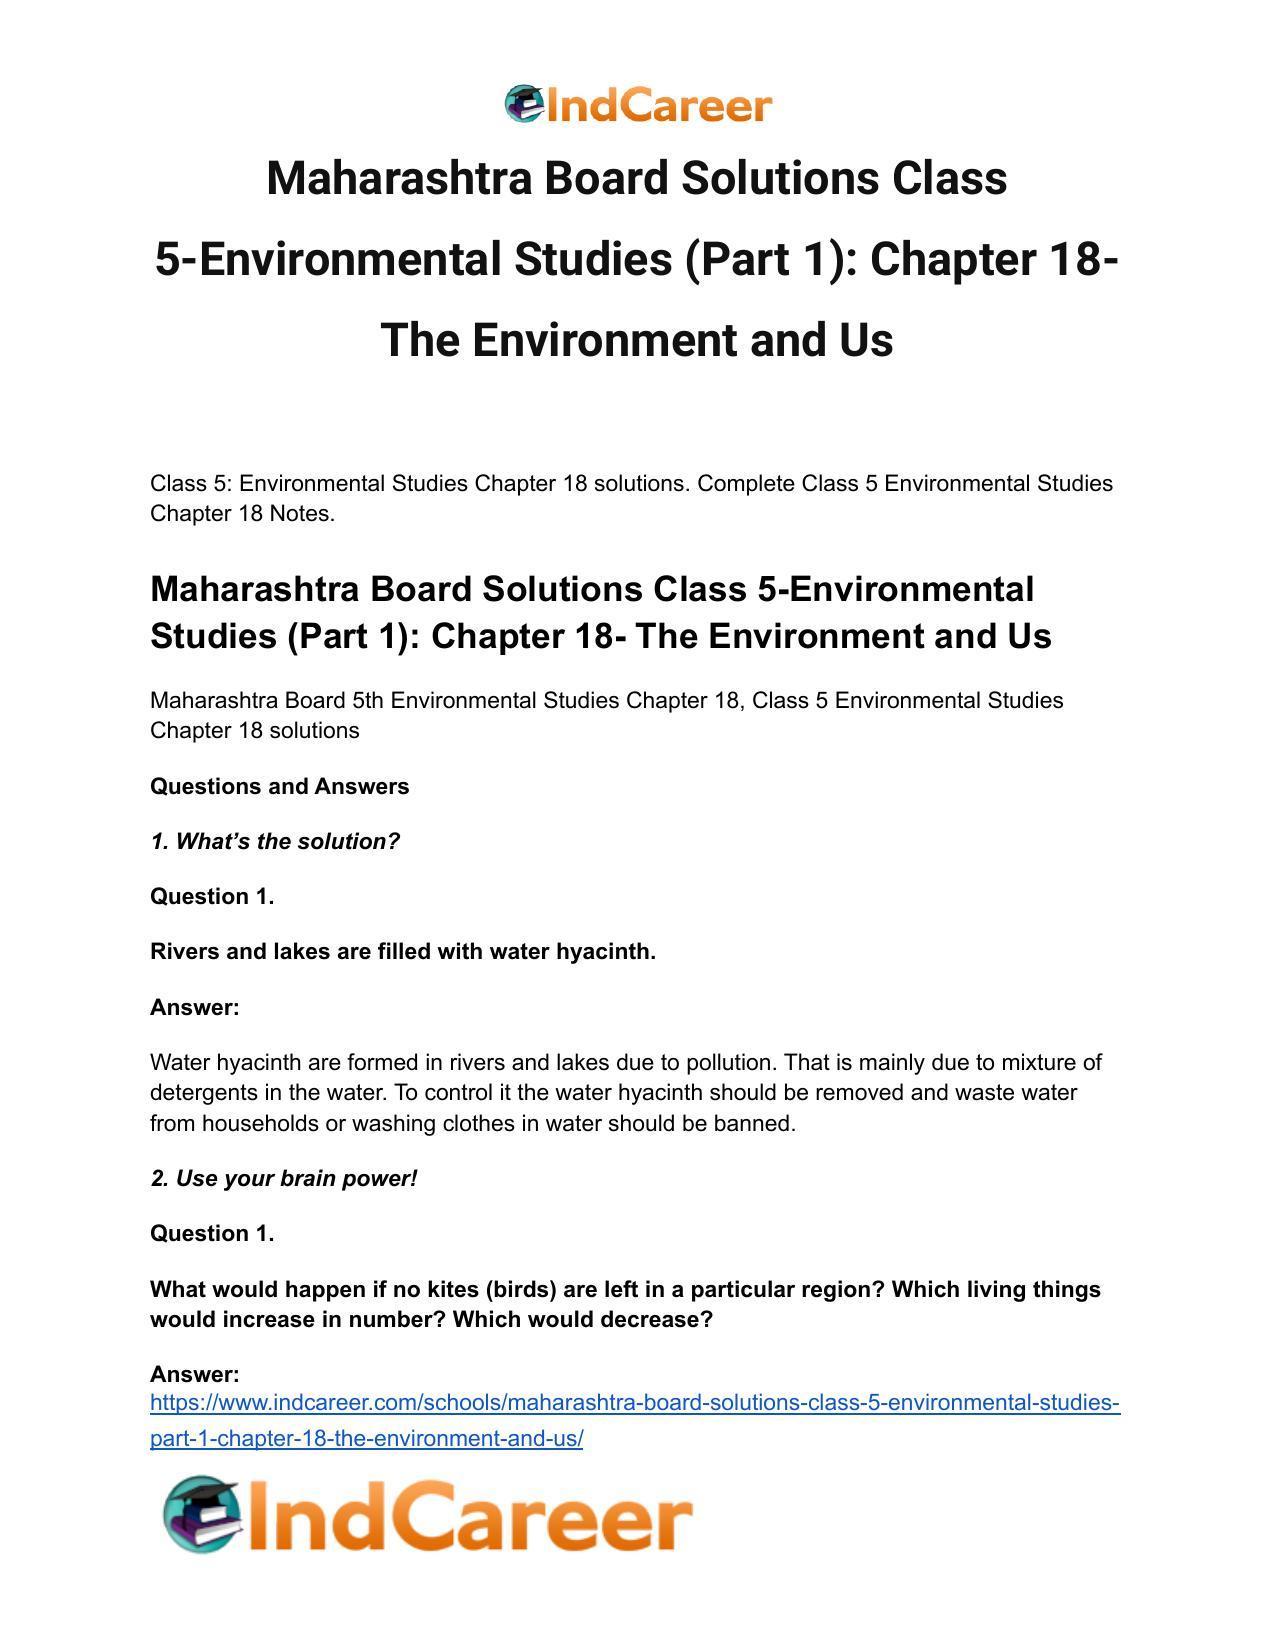 Maharashtra Board Solutions Class 5-Environmental Studies (Part 1): Chapter 18- The Environment and Us - Page 2